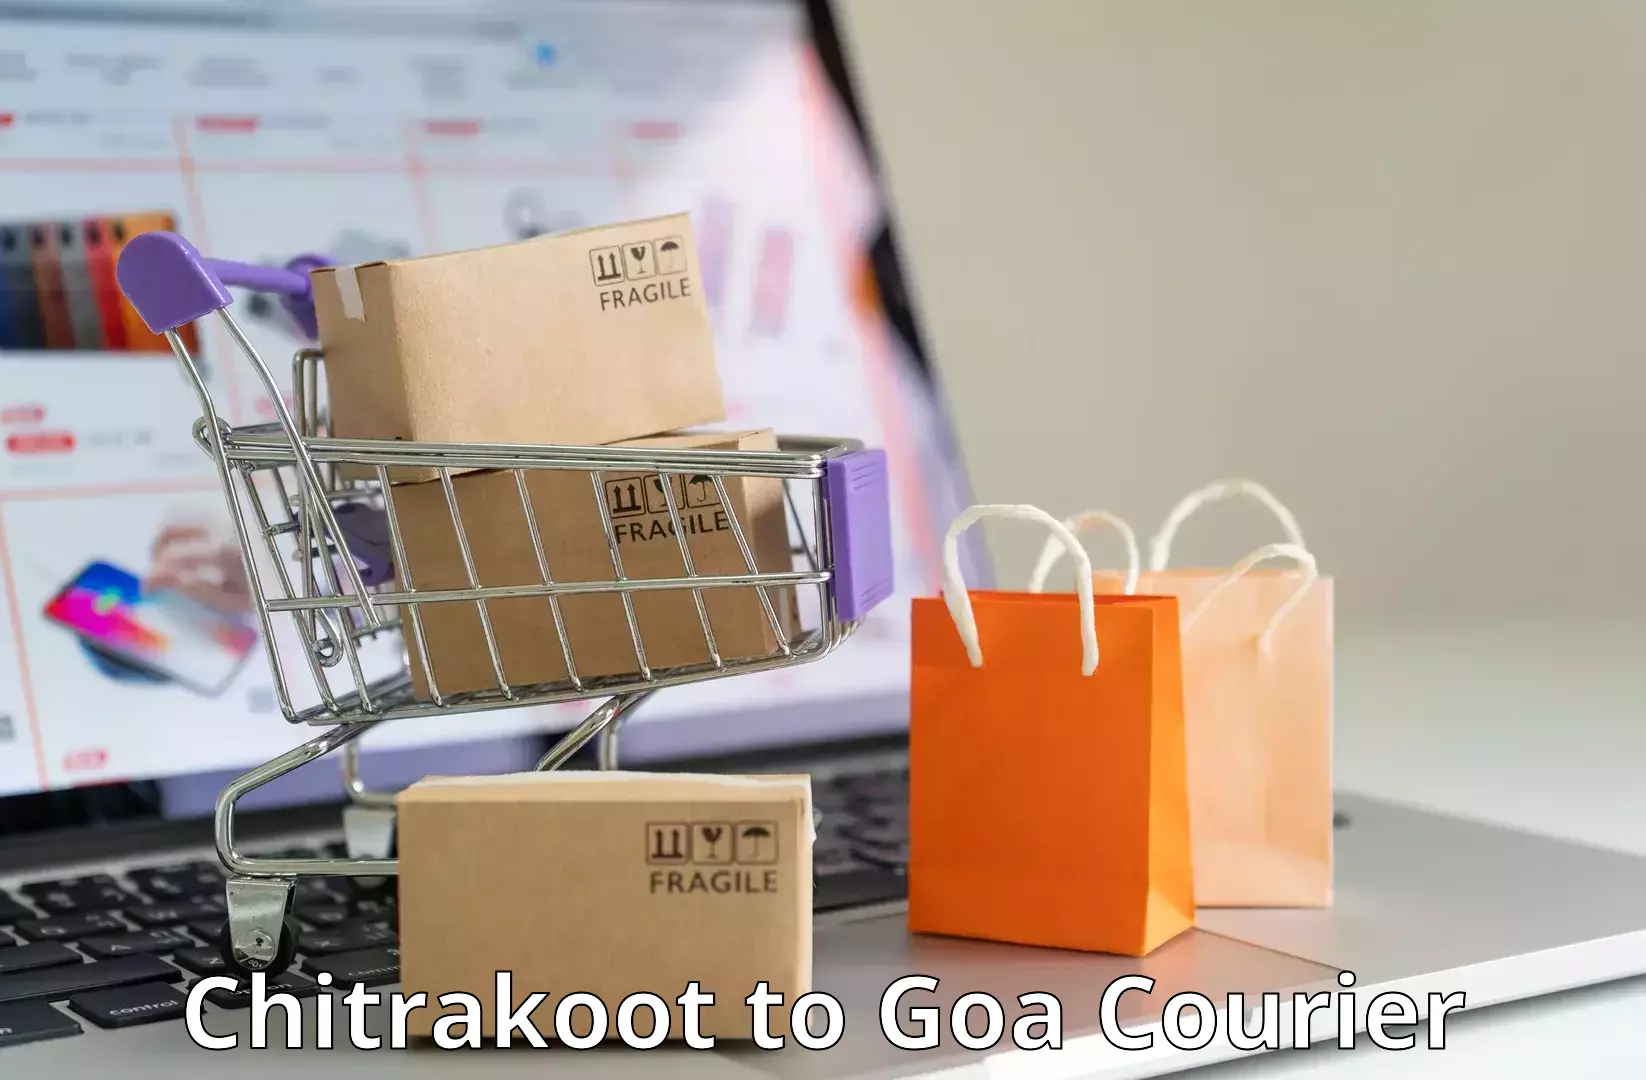 Advanced package delivery Chitrakoot to Goa